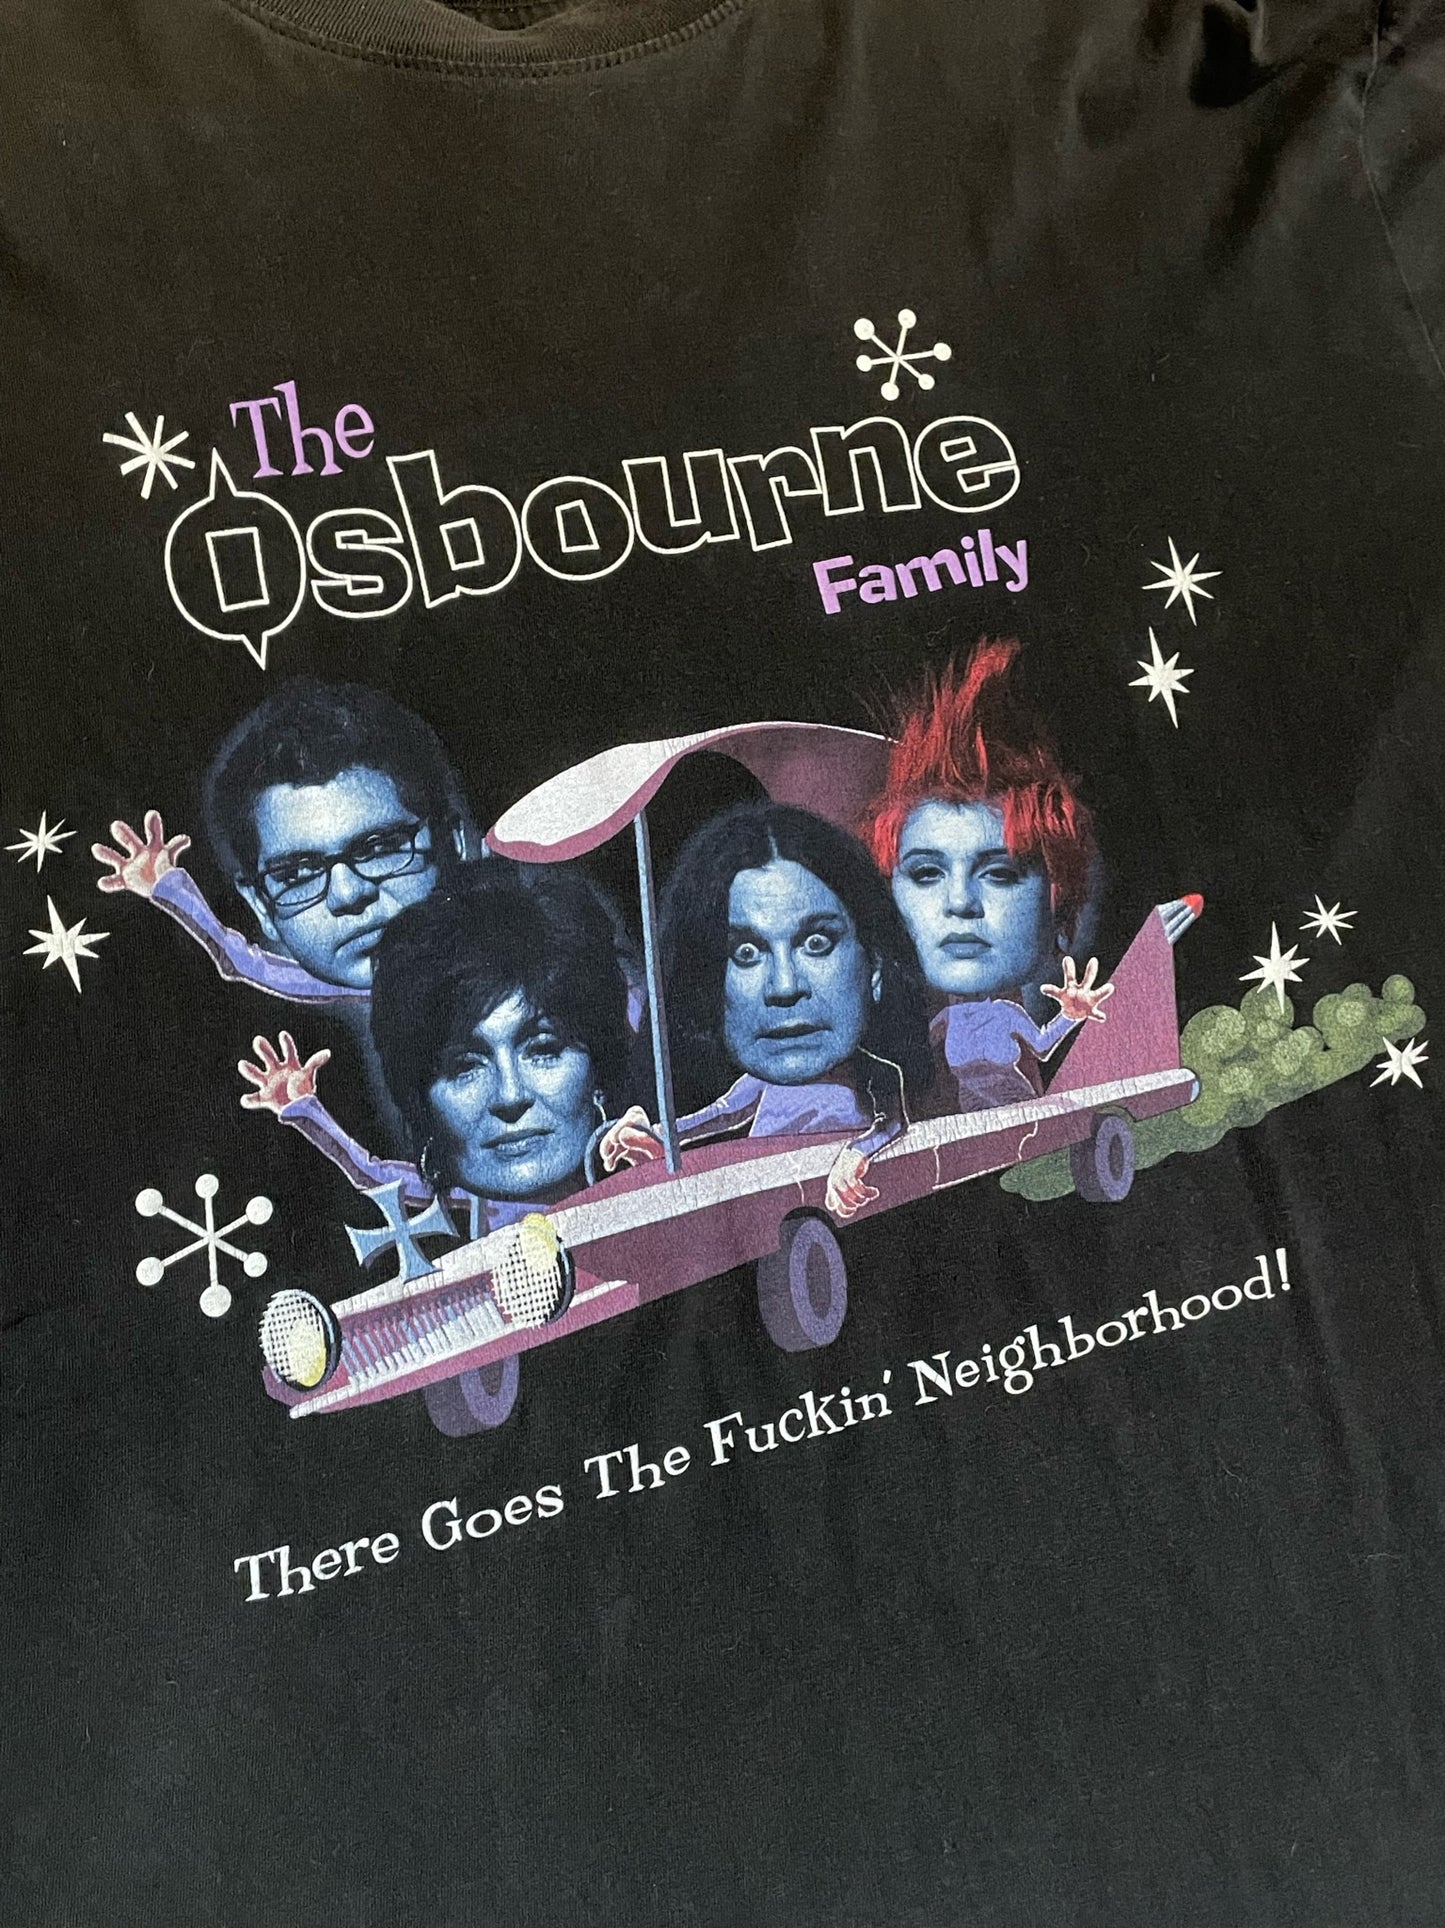 VINTAGE 2002 THE OSBOURNE FAMILY "THERE GOES THE NEIGHBORHOOD" MTV SHOW T-SHIRT  SZ: L